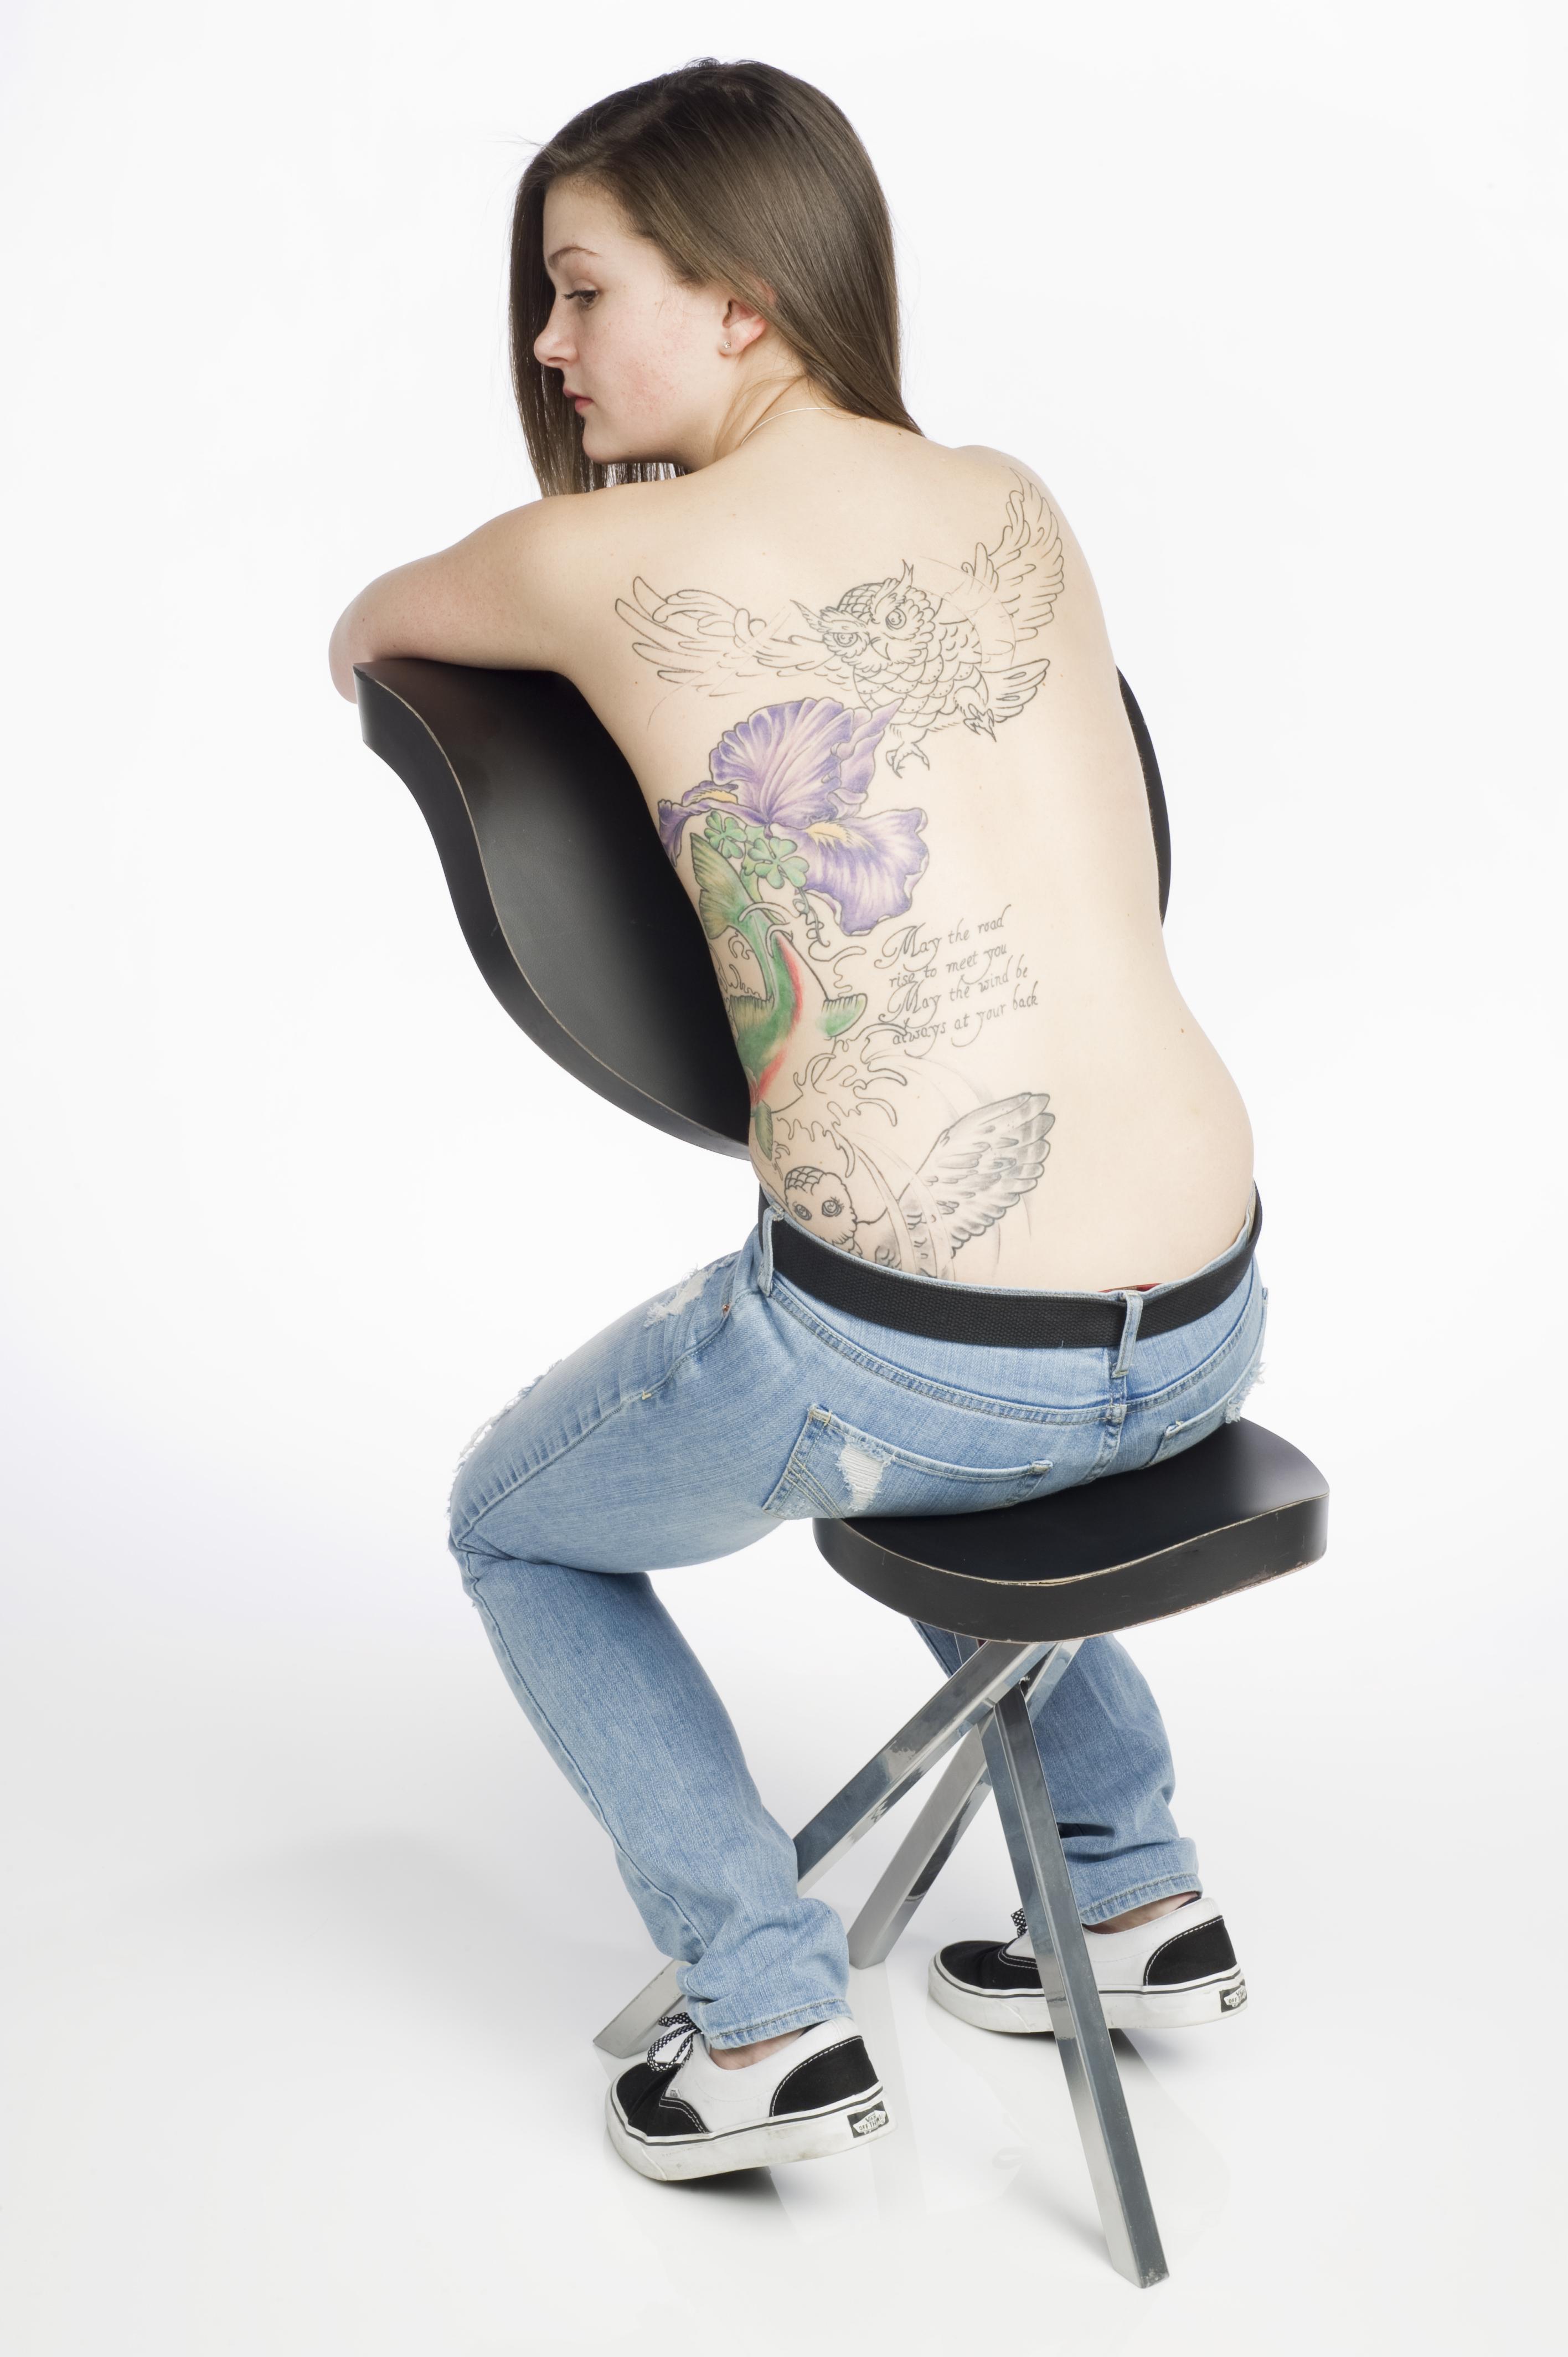 A shirtless person sits on a tattoo chair.